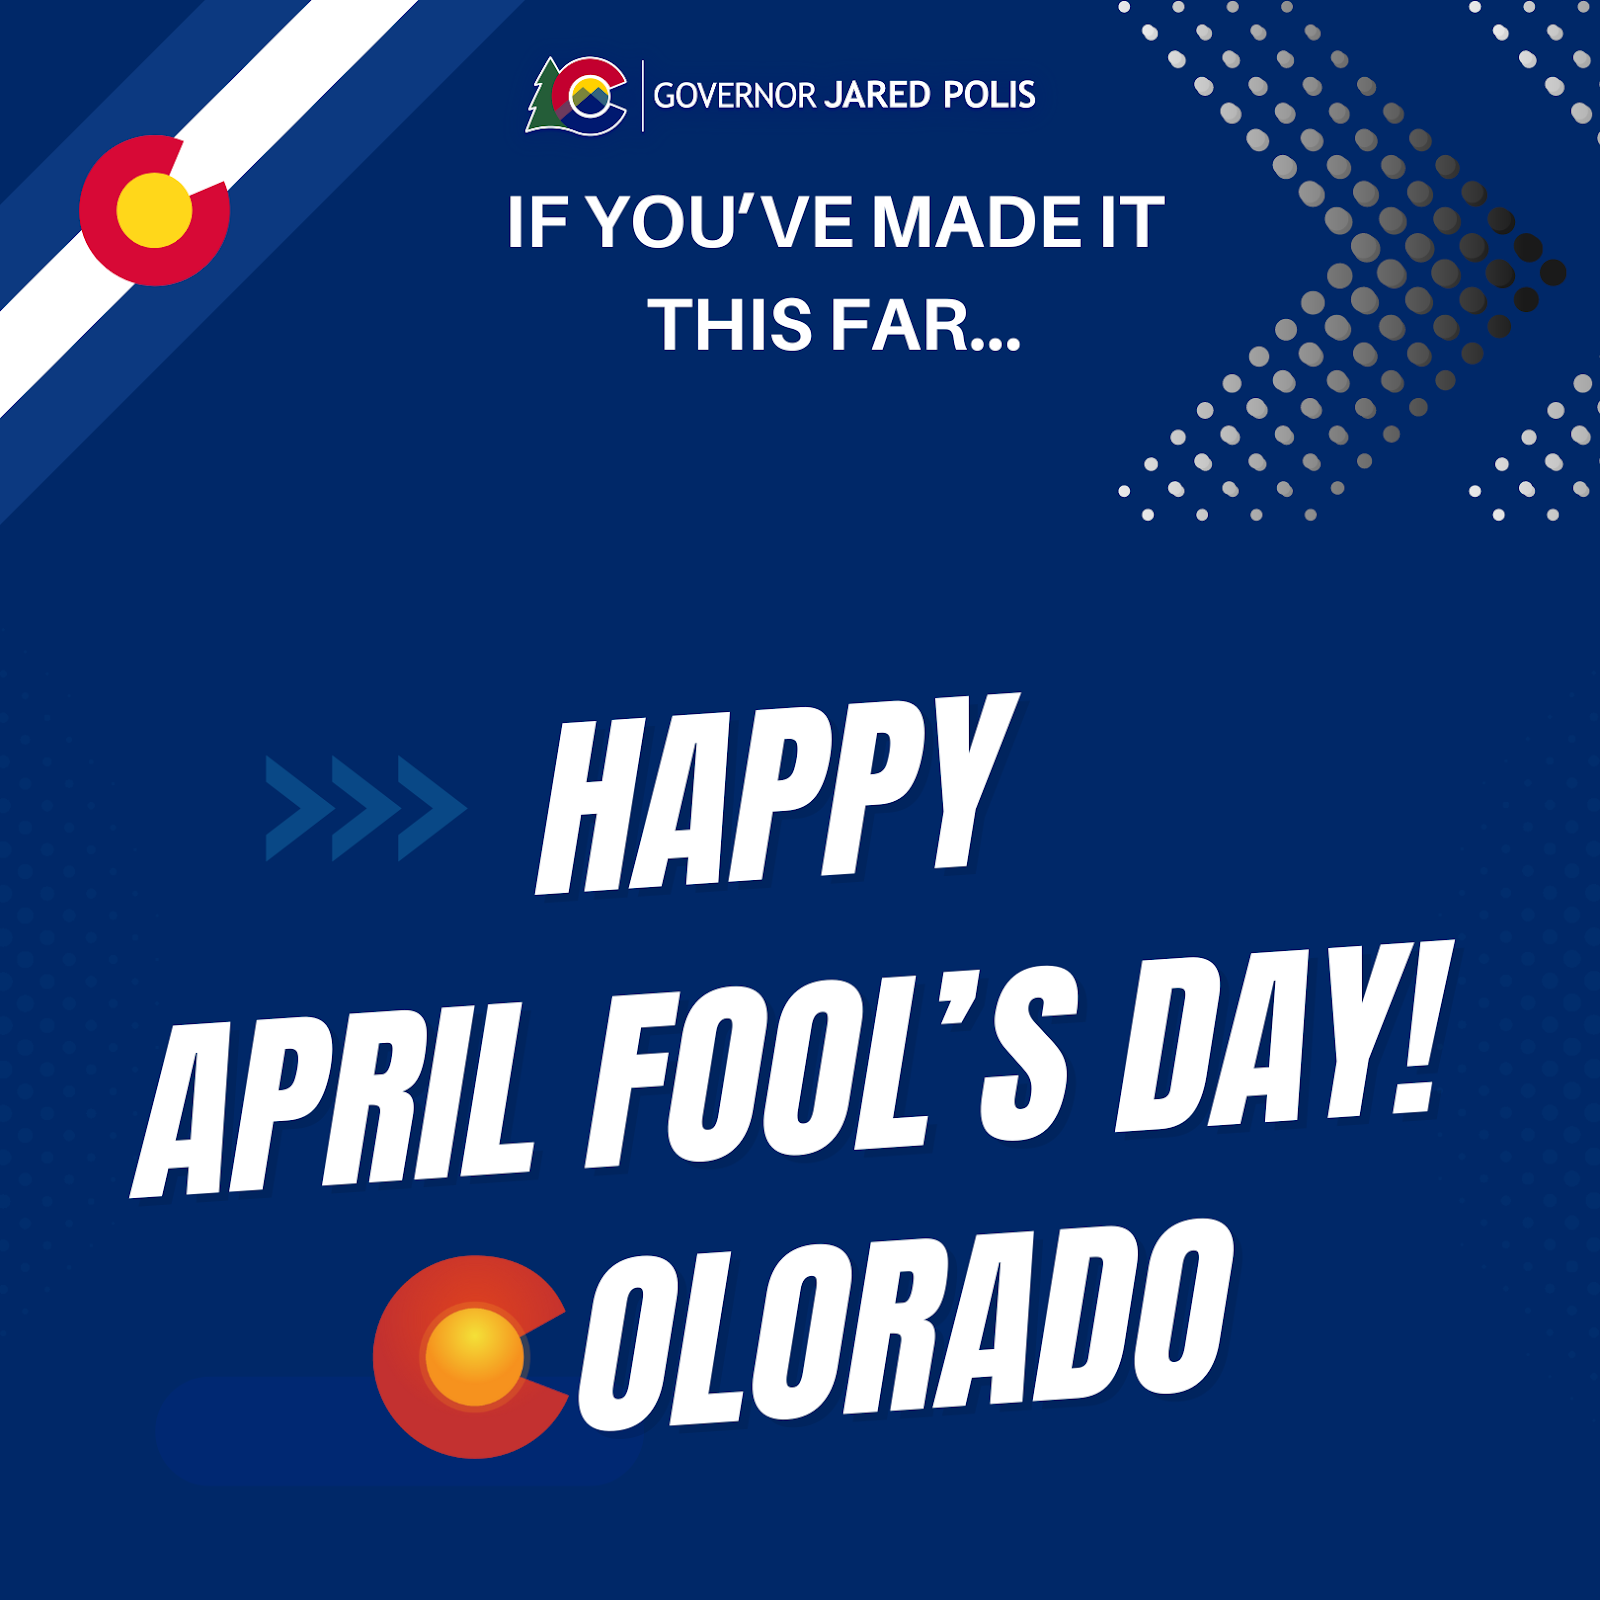 If you’ve made it this far. Happy April Fool’s Day. Colorado logo